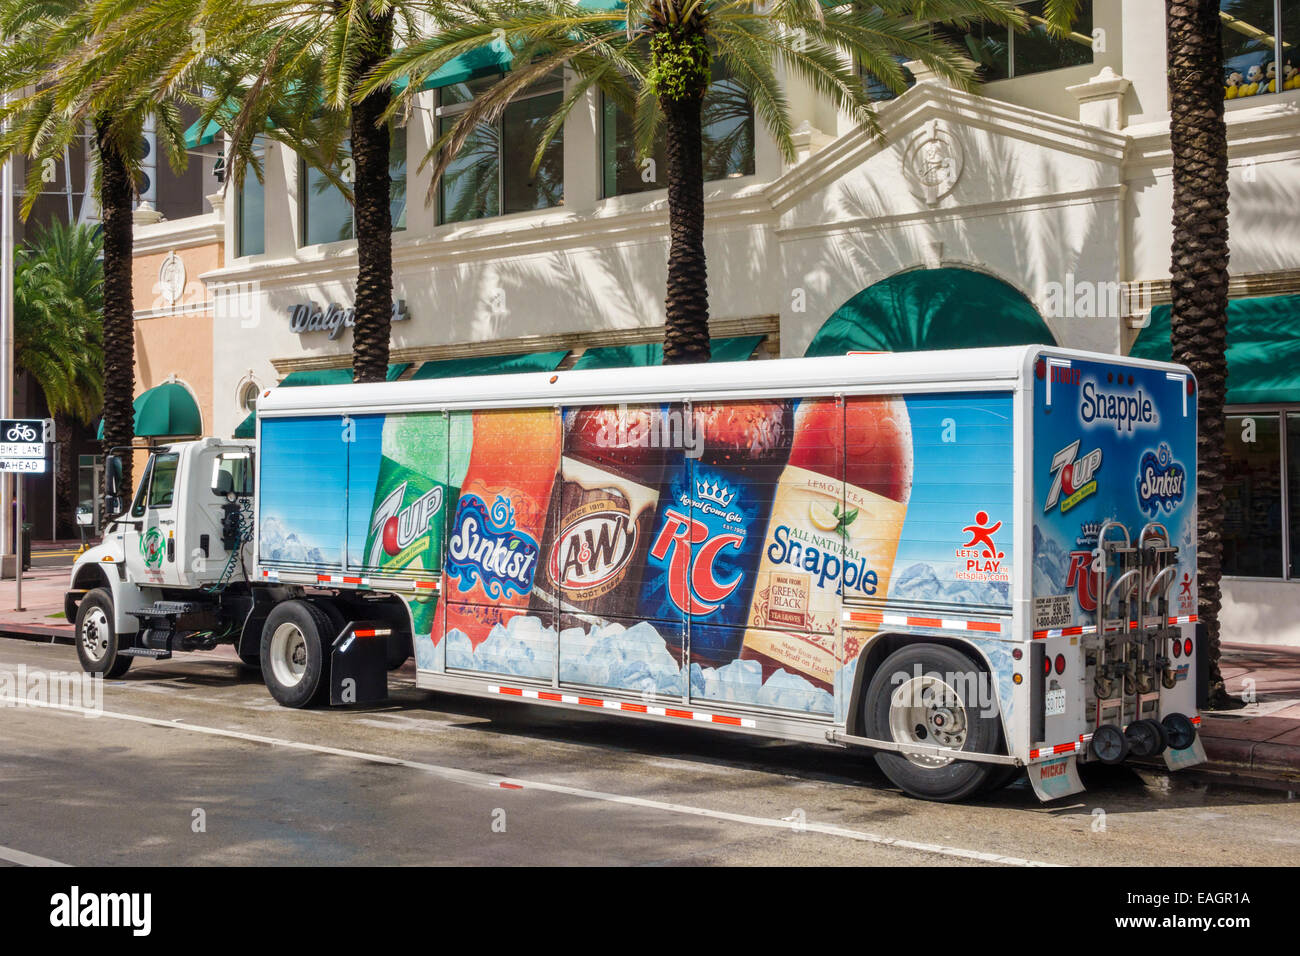 Miami Beach Florida,truck tractor trailer,delivery,drink drinks,Snapple,RC,cola,A&W,Sunkist,7-Up,FL141031006 Stock Photo